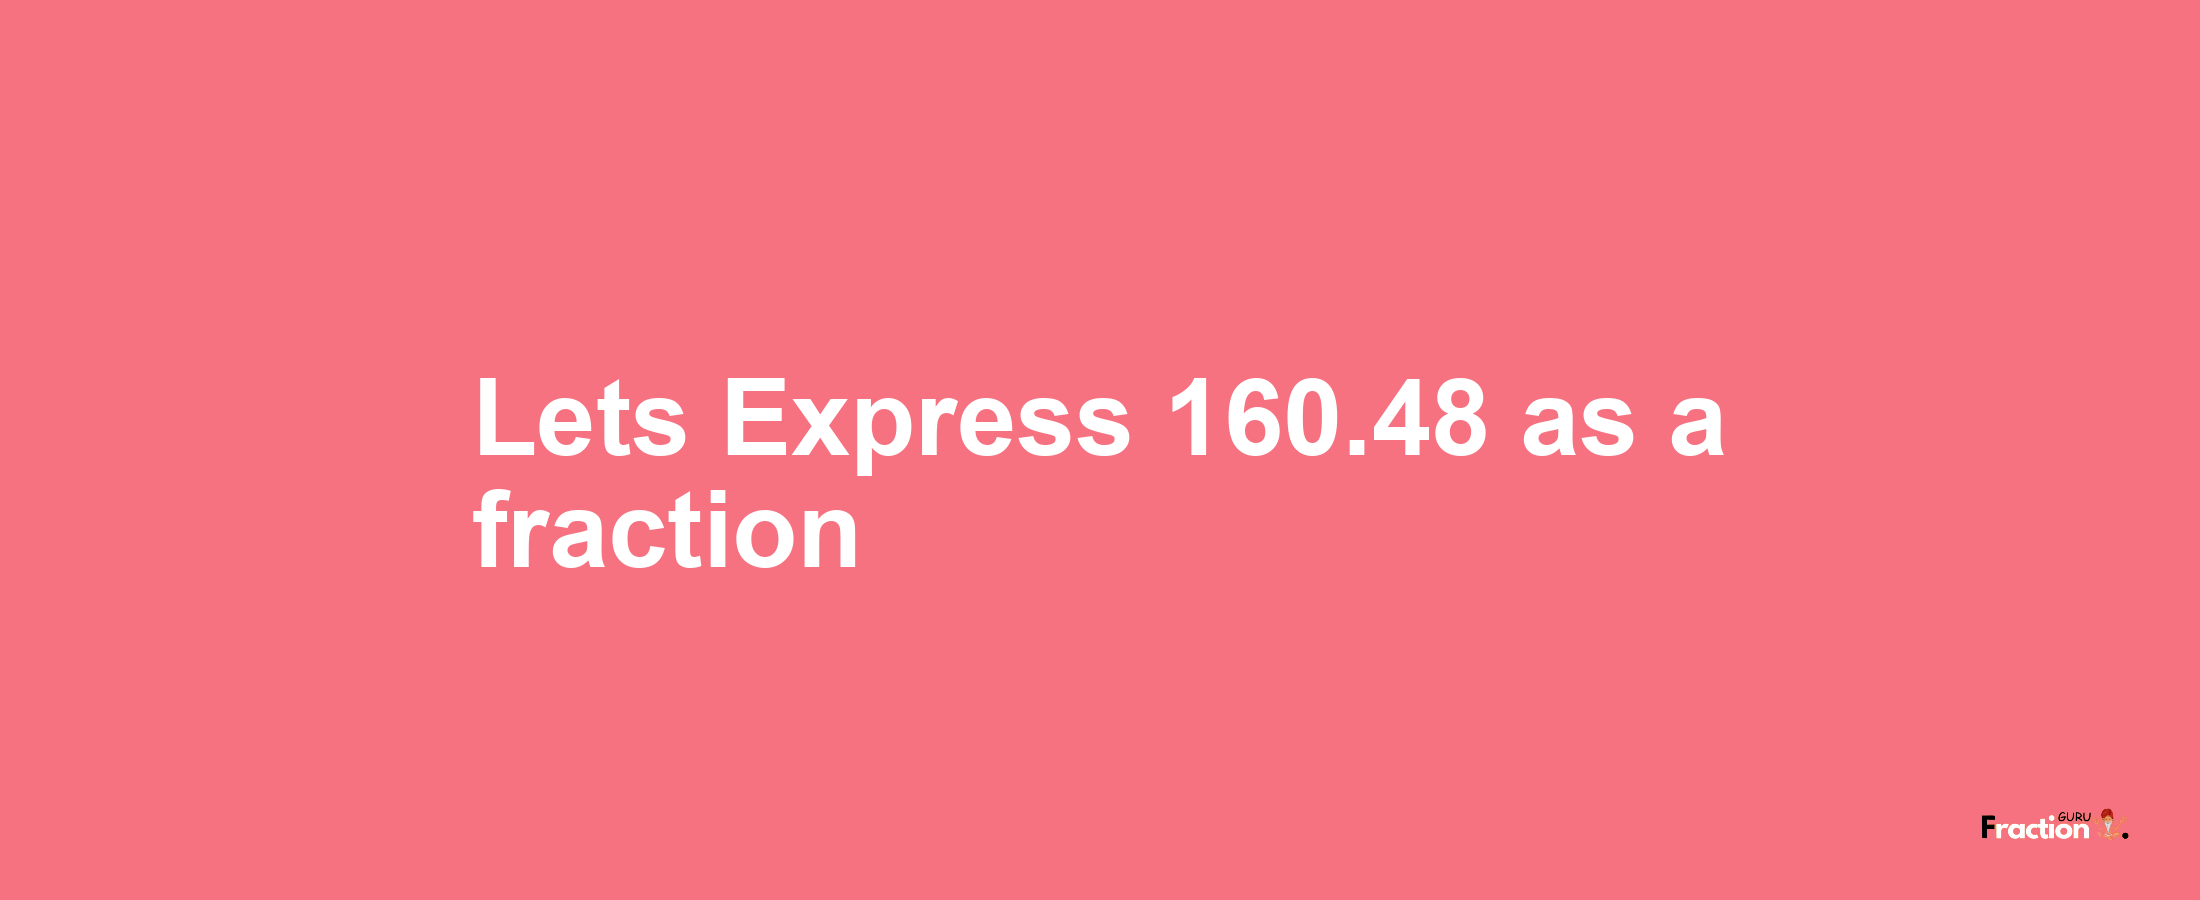 Lets Express 160.48 as afraction